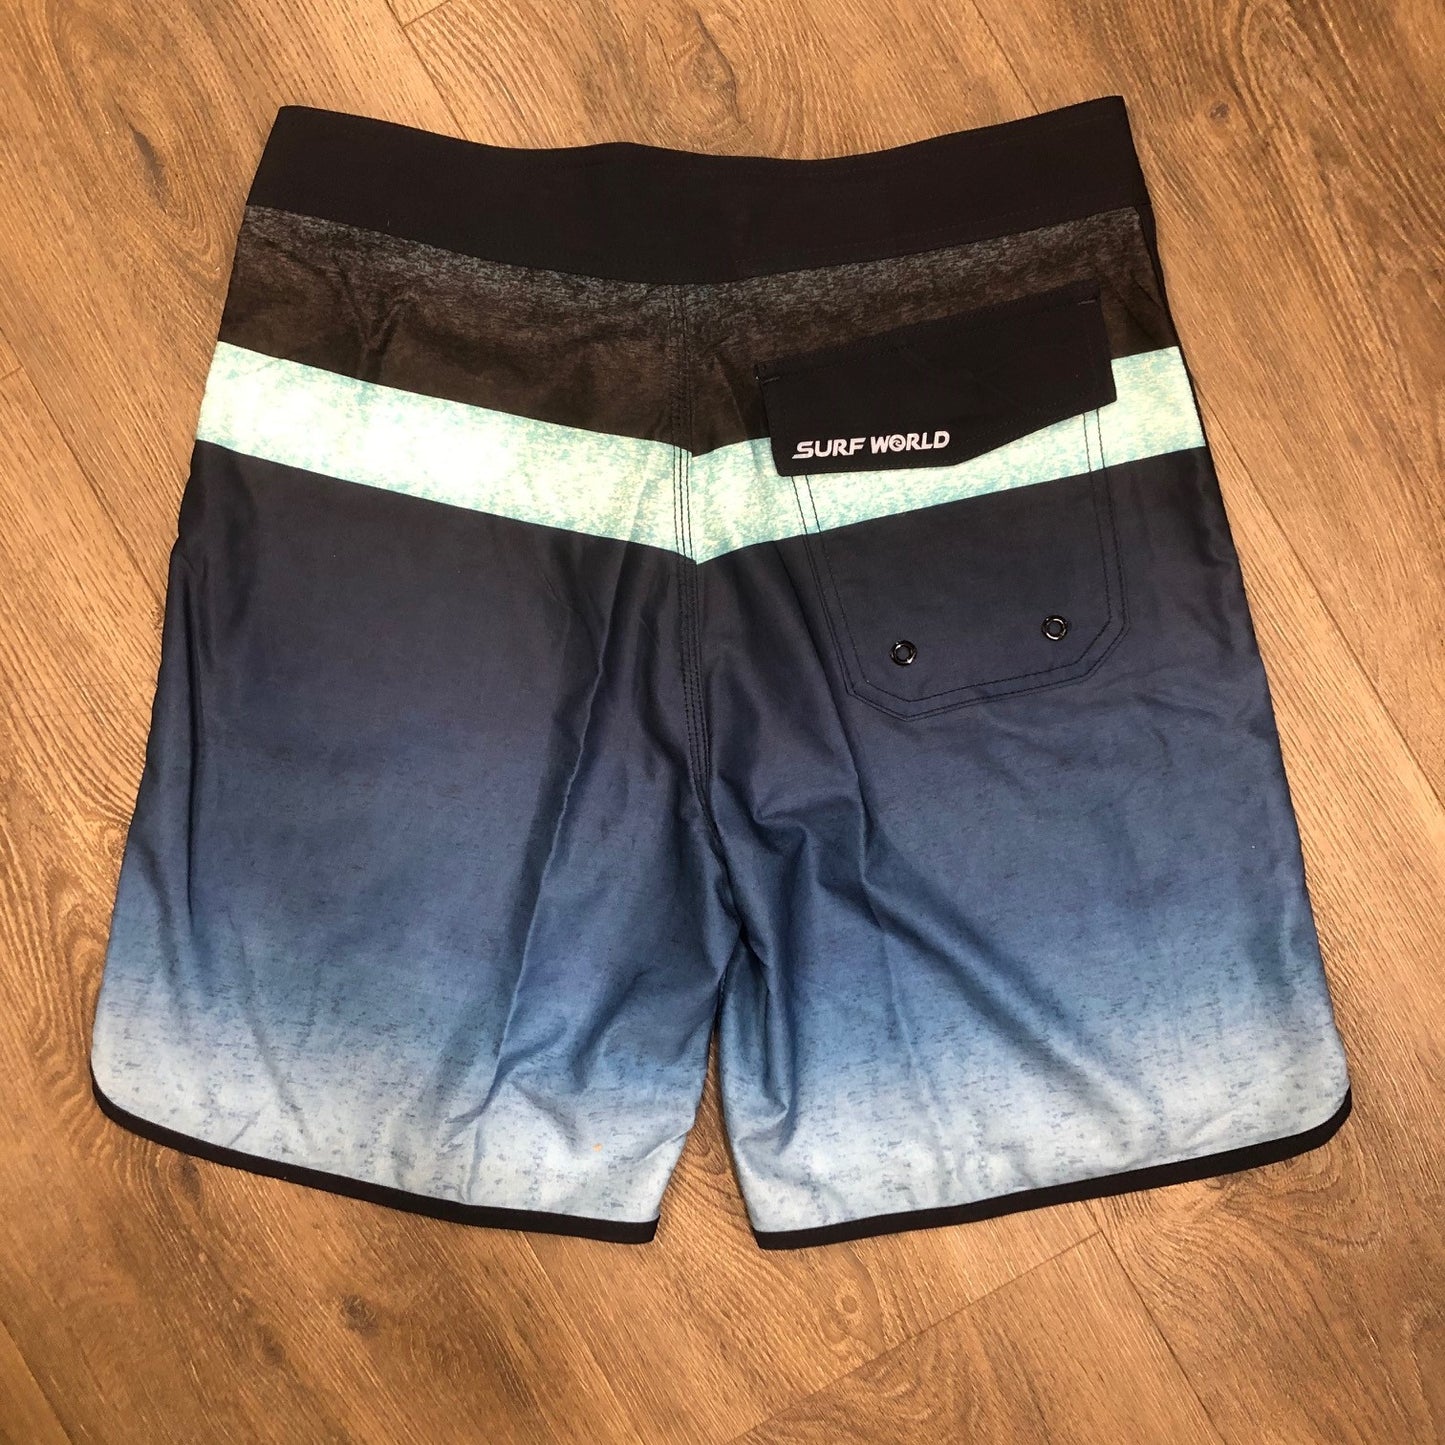 Surf World The Ledge Boardshorts - The Surf World Collection - Navy Teal Mens Boardshorts